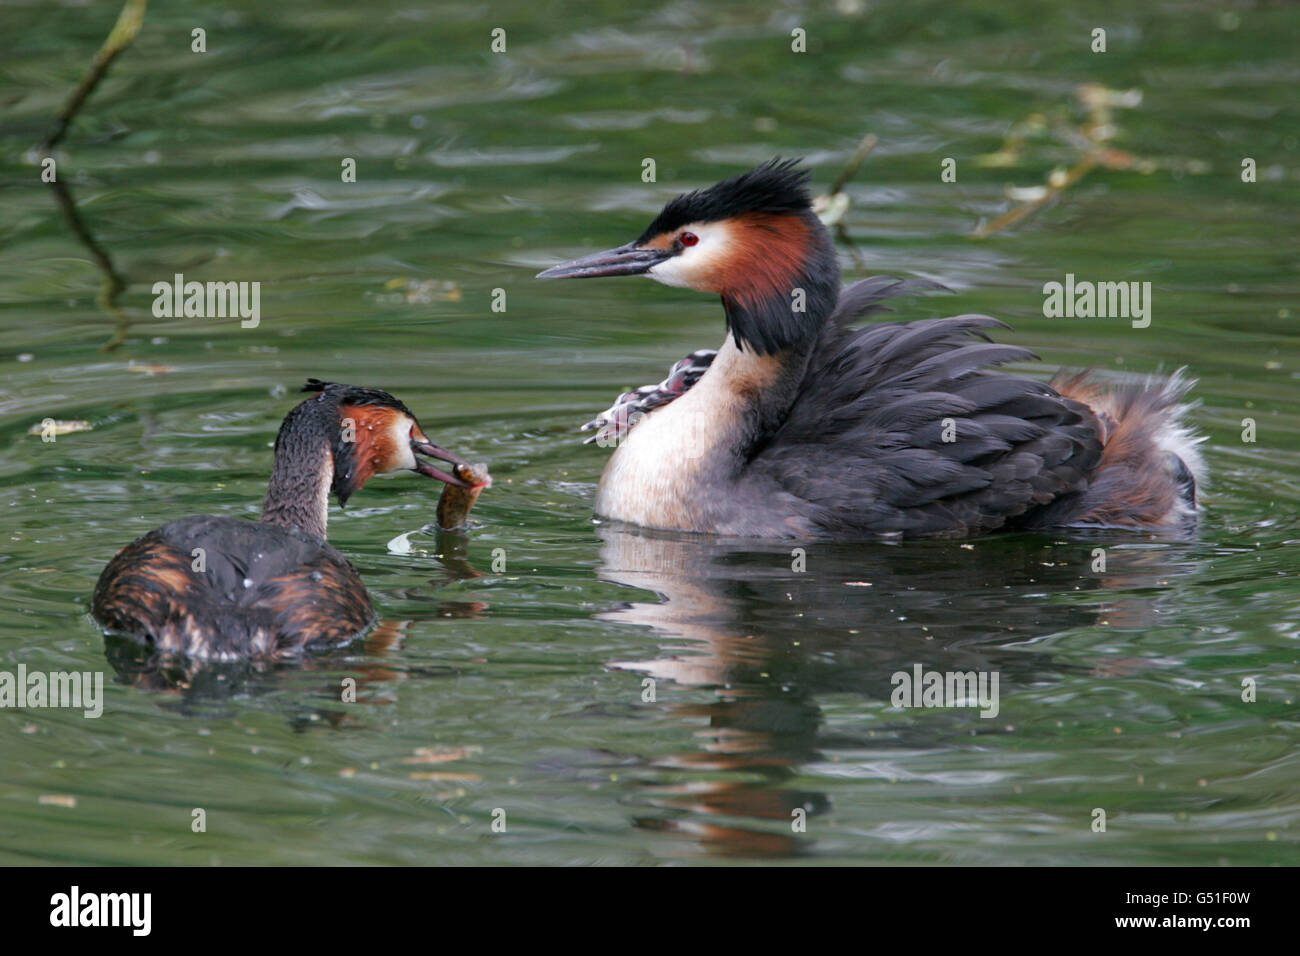 Great-crested Grebes, Podiceps cristatus, female bringing fish to young on back of male. Taken May. Lea Valley, Essex, UK. Stock Photo